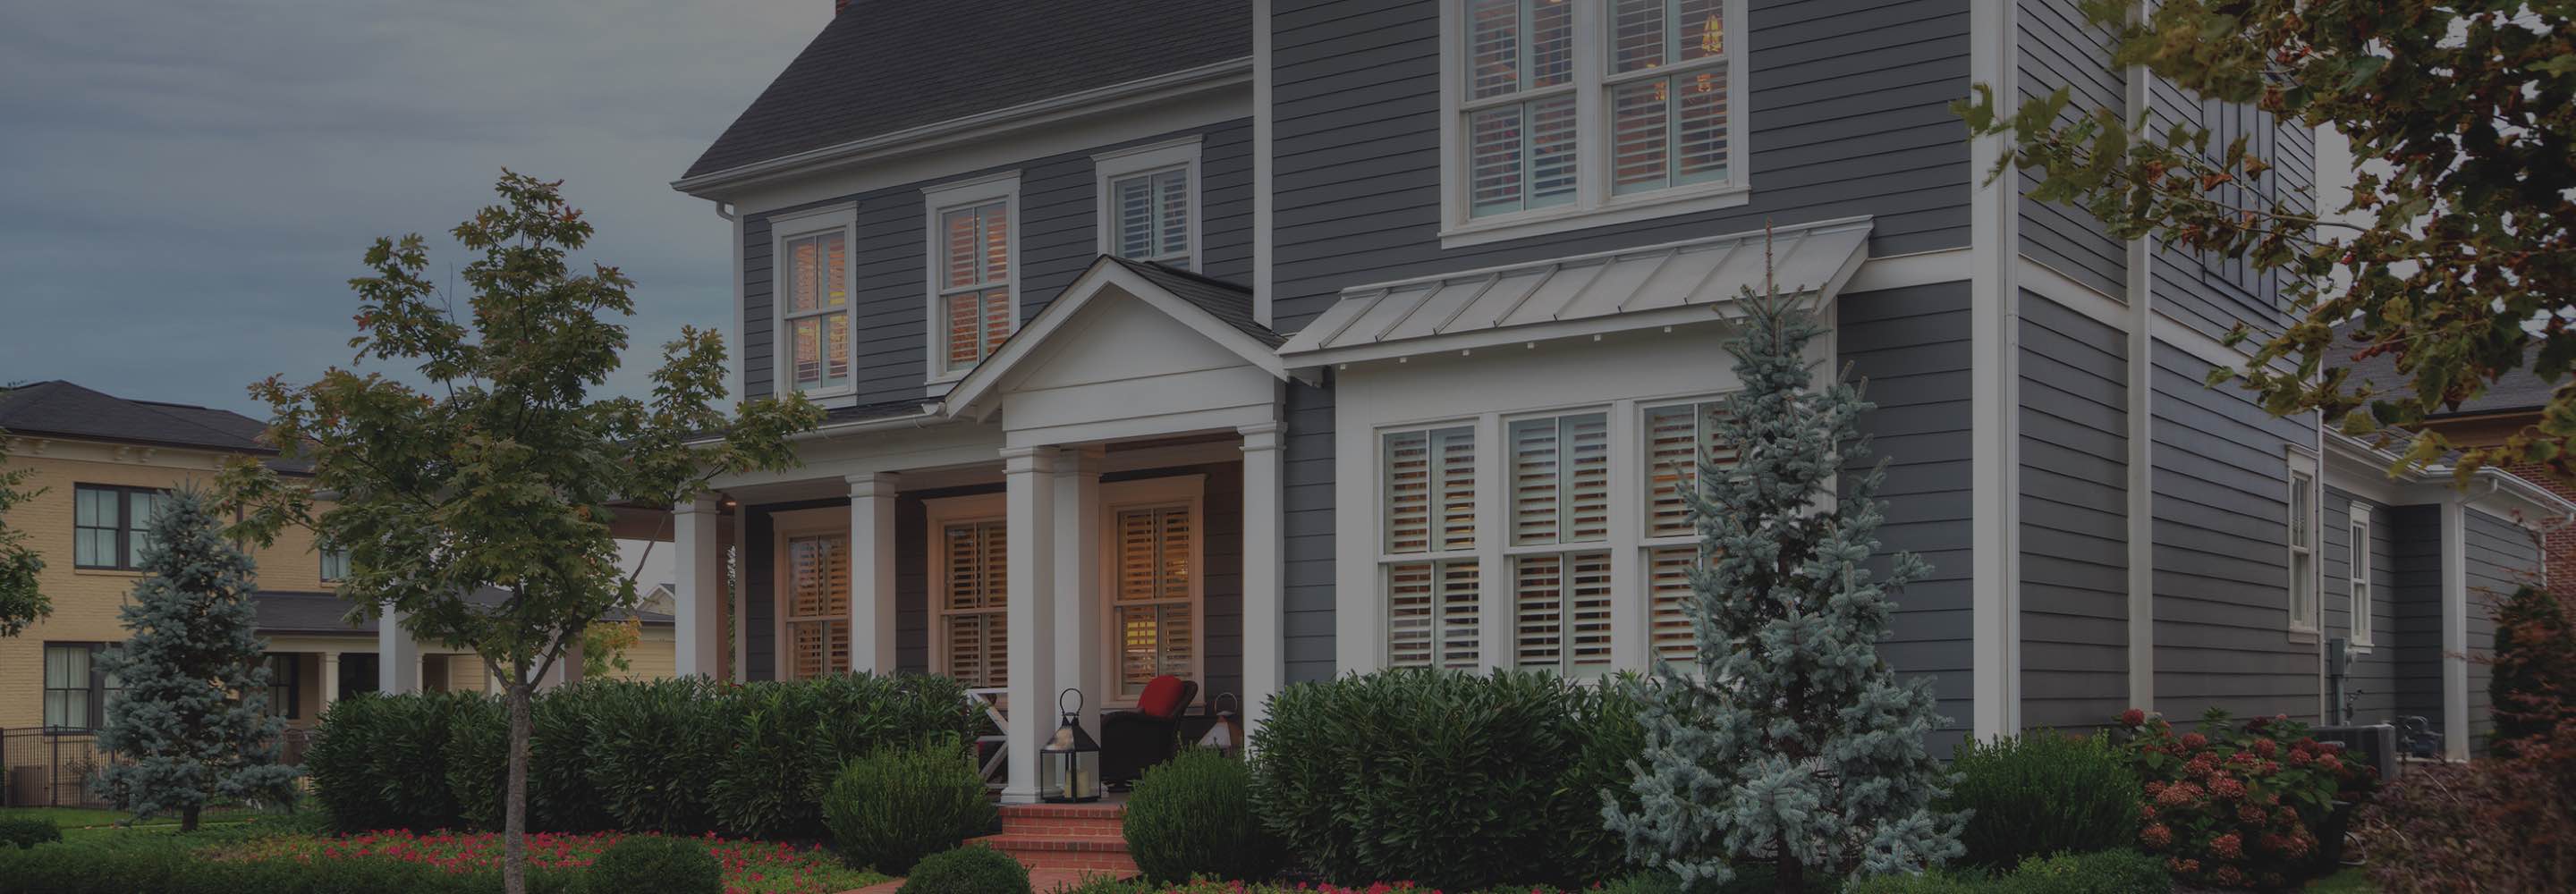 James Hardie Siding: Evening Blue - Homescapes of New England: 603.734.4282